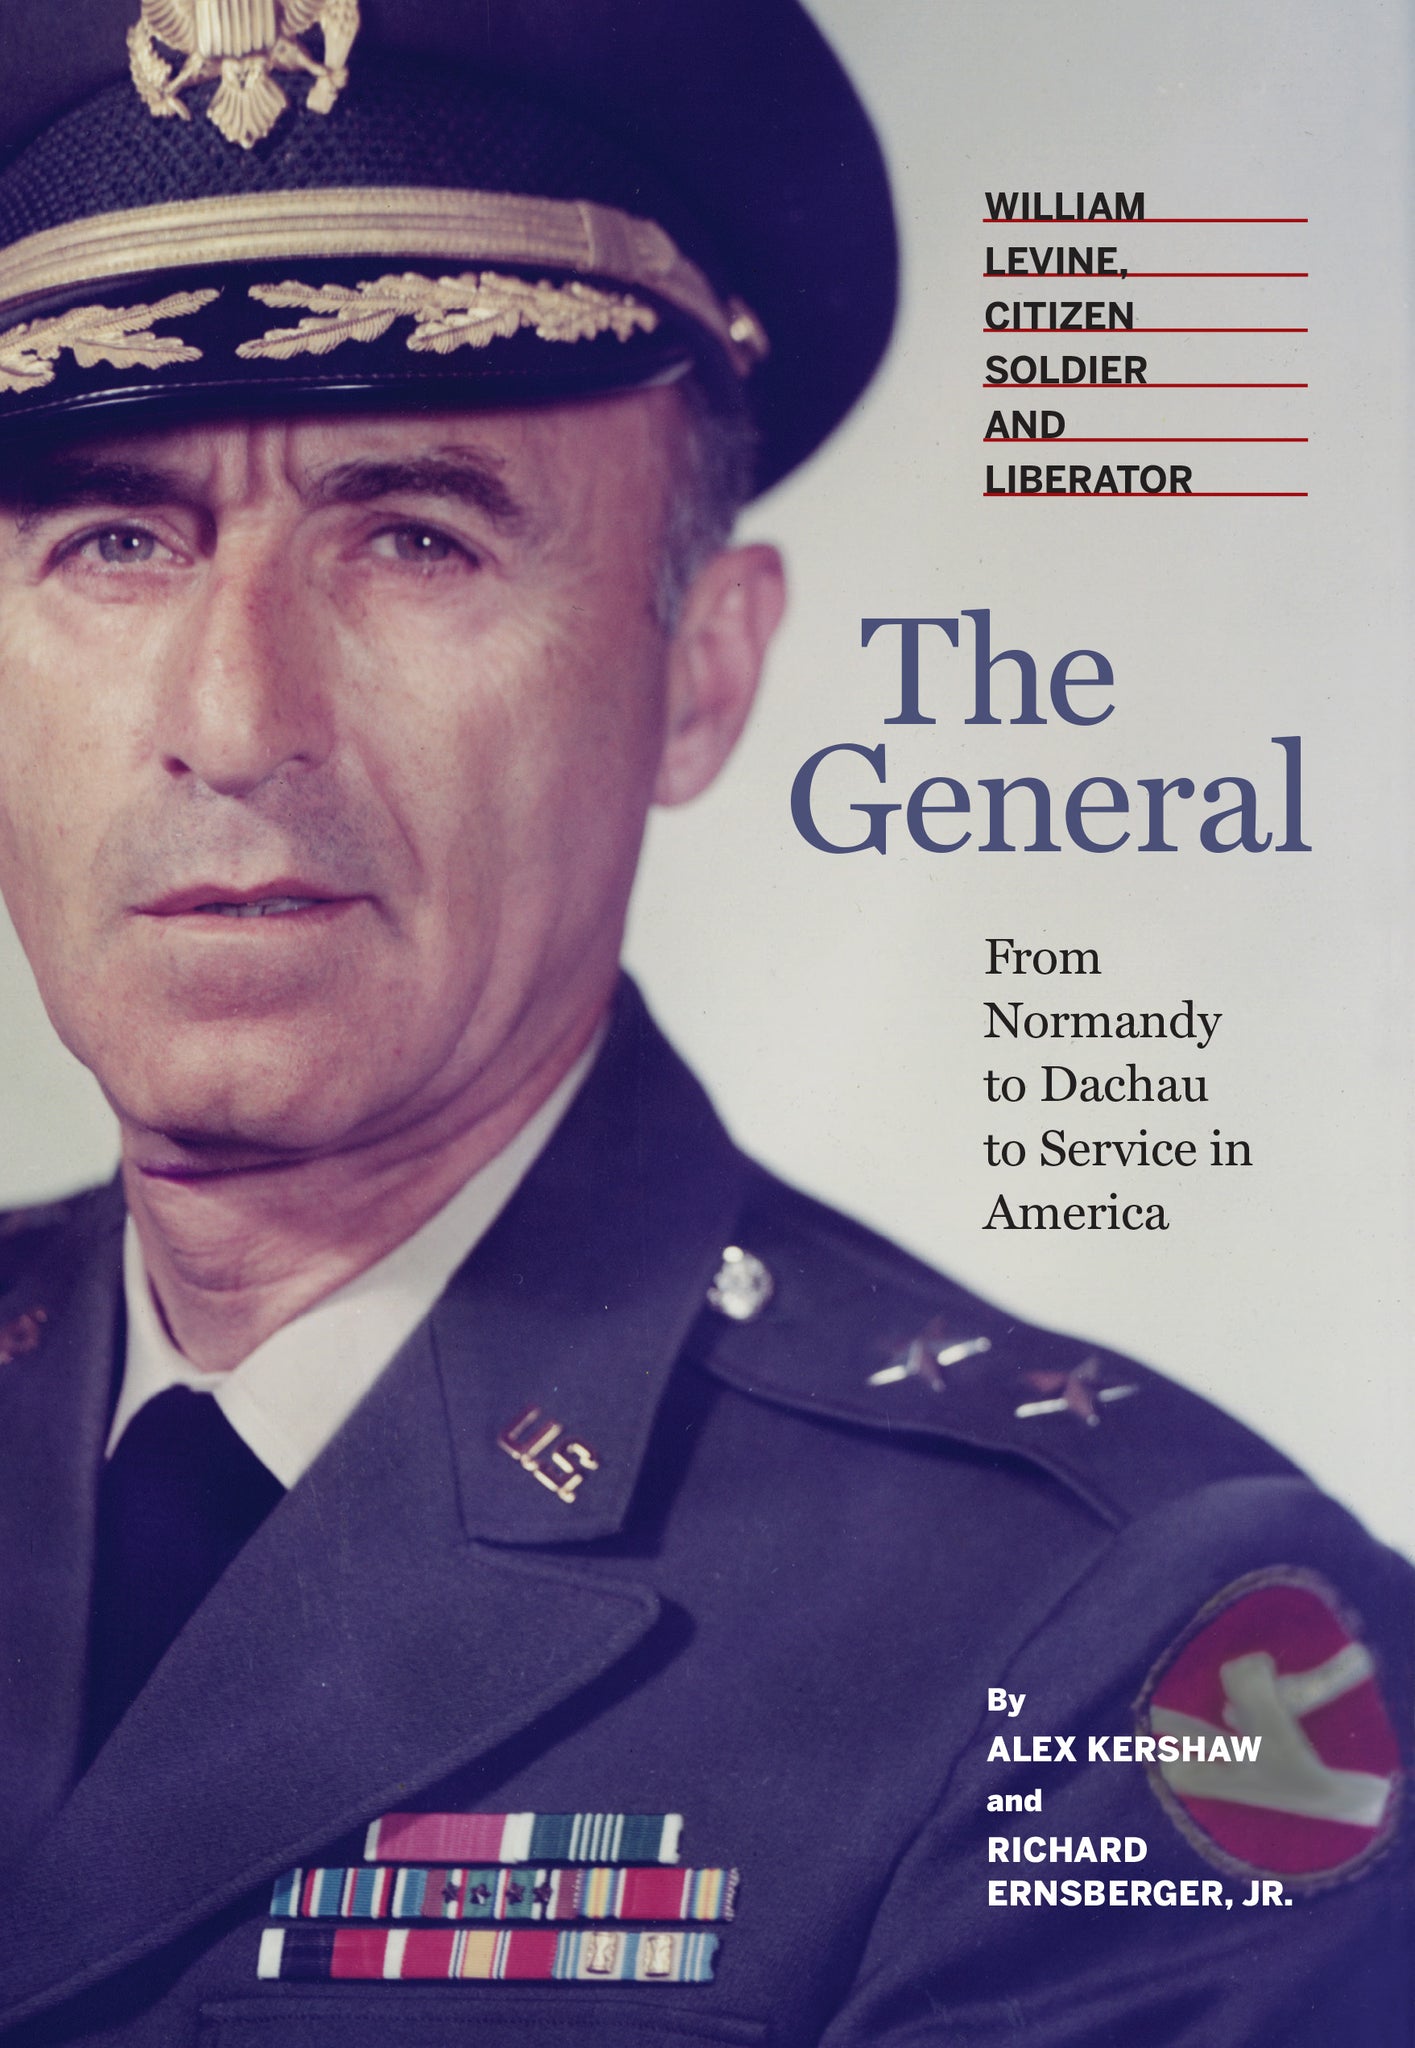 The General: William Levine, Citizen Soldier and Liberator by Alex Kershaw and Richard Ernsberger Jr.